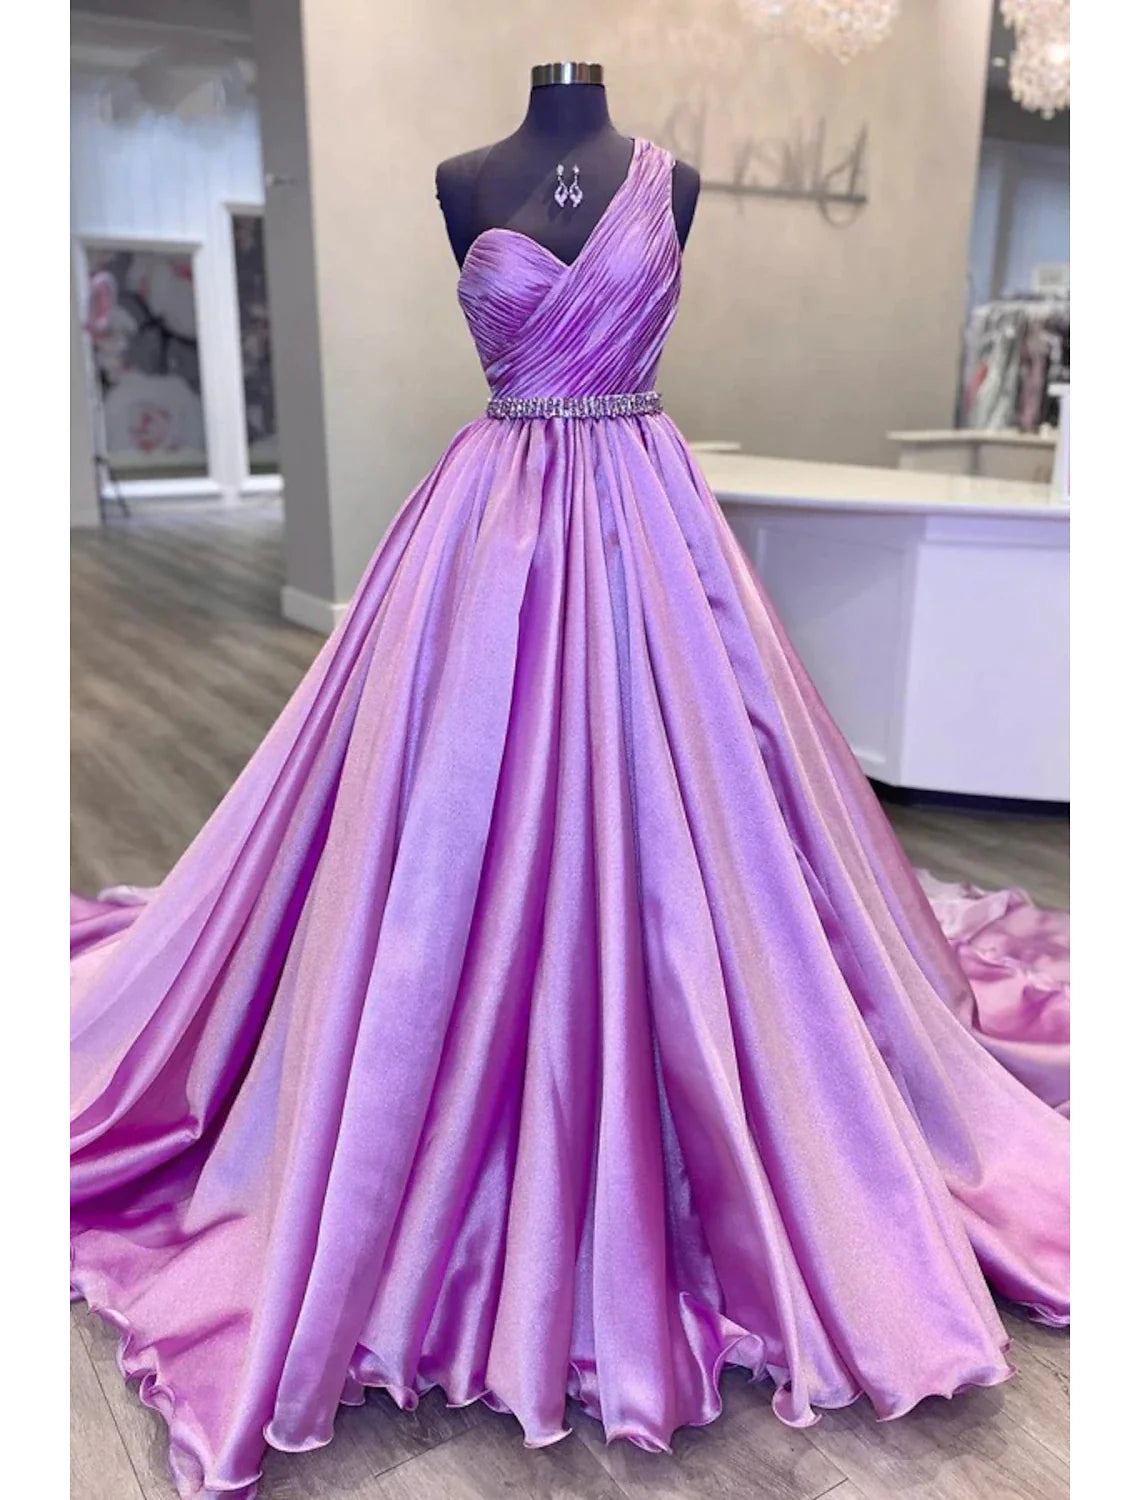 Ball Gown Evening Gown Luxurious Dress Wedding Party Court Train Sleeveless One Shoulder Belt / Sash Charmeuse with Ruched Crystals